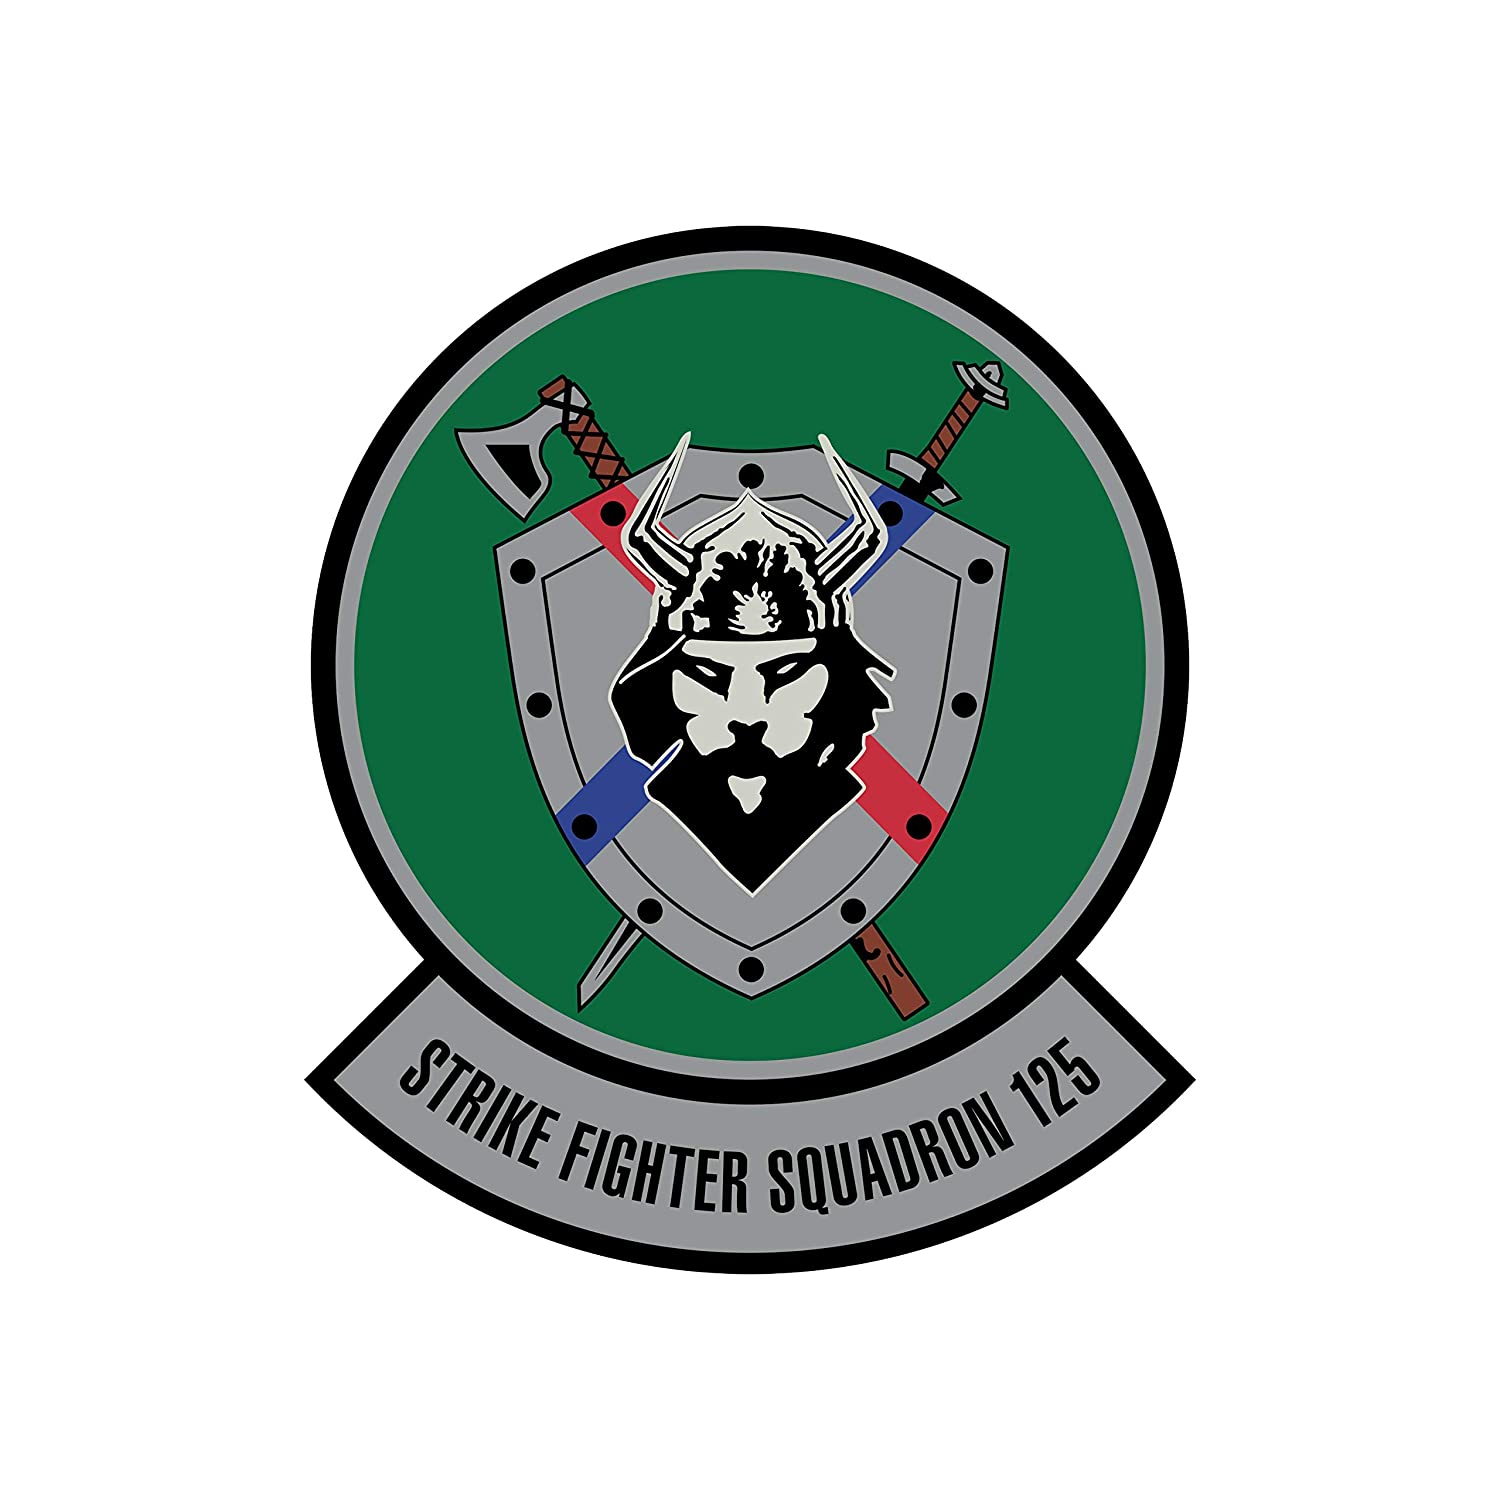 Strike Fighter Squadron 125 - Patch Vinyl Decal - Available in Multiple Sizes